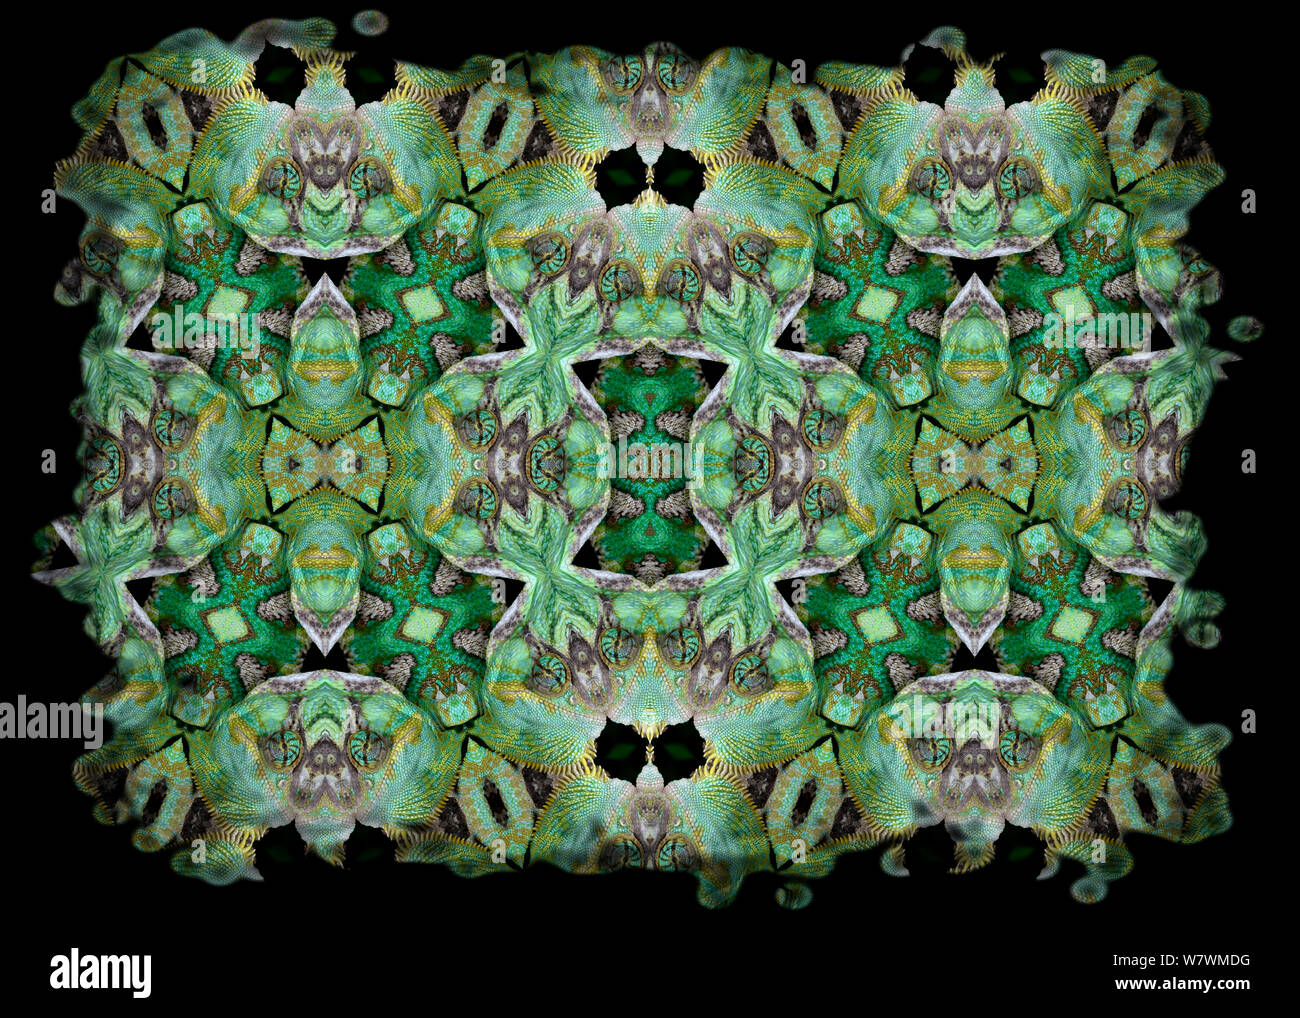 Kaleidoscope pattern formed from picture of Veiled Chameleon (Chamaeleo calyptratus) scales and face. Restricted for Editorial use until December 2015 Stock Photo